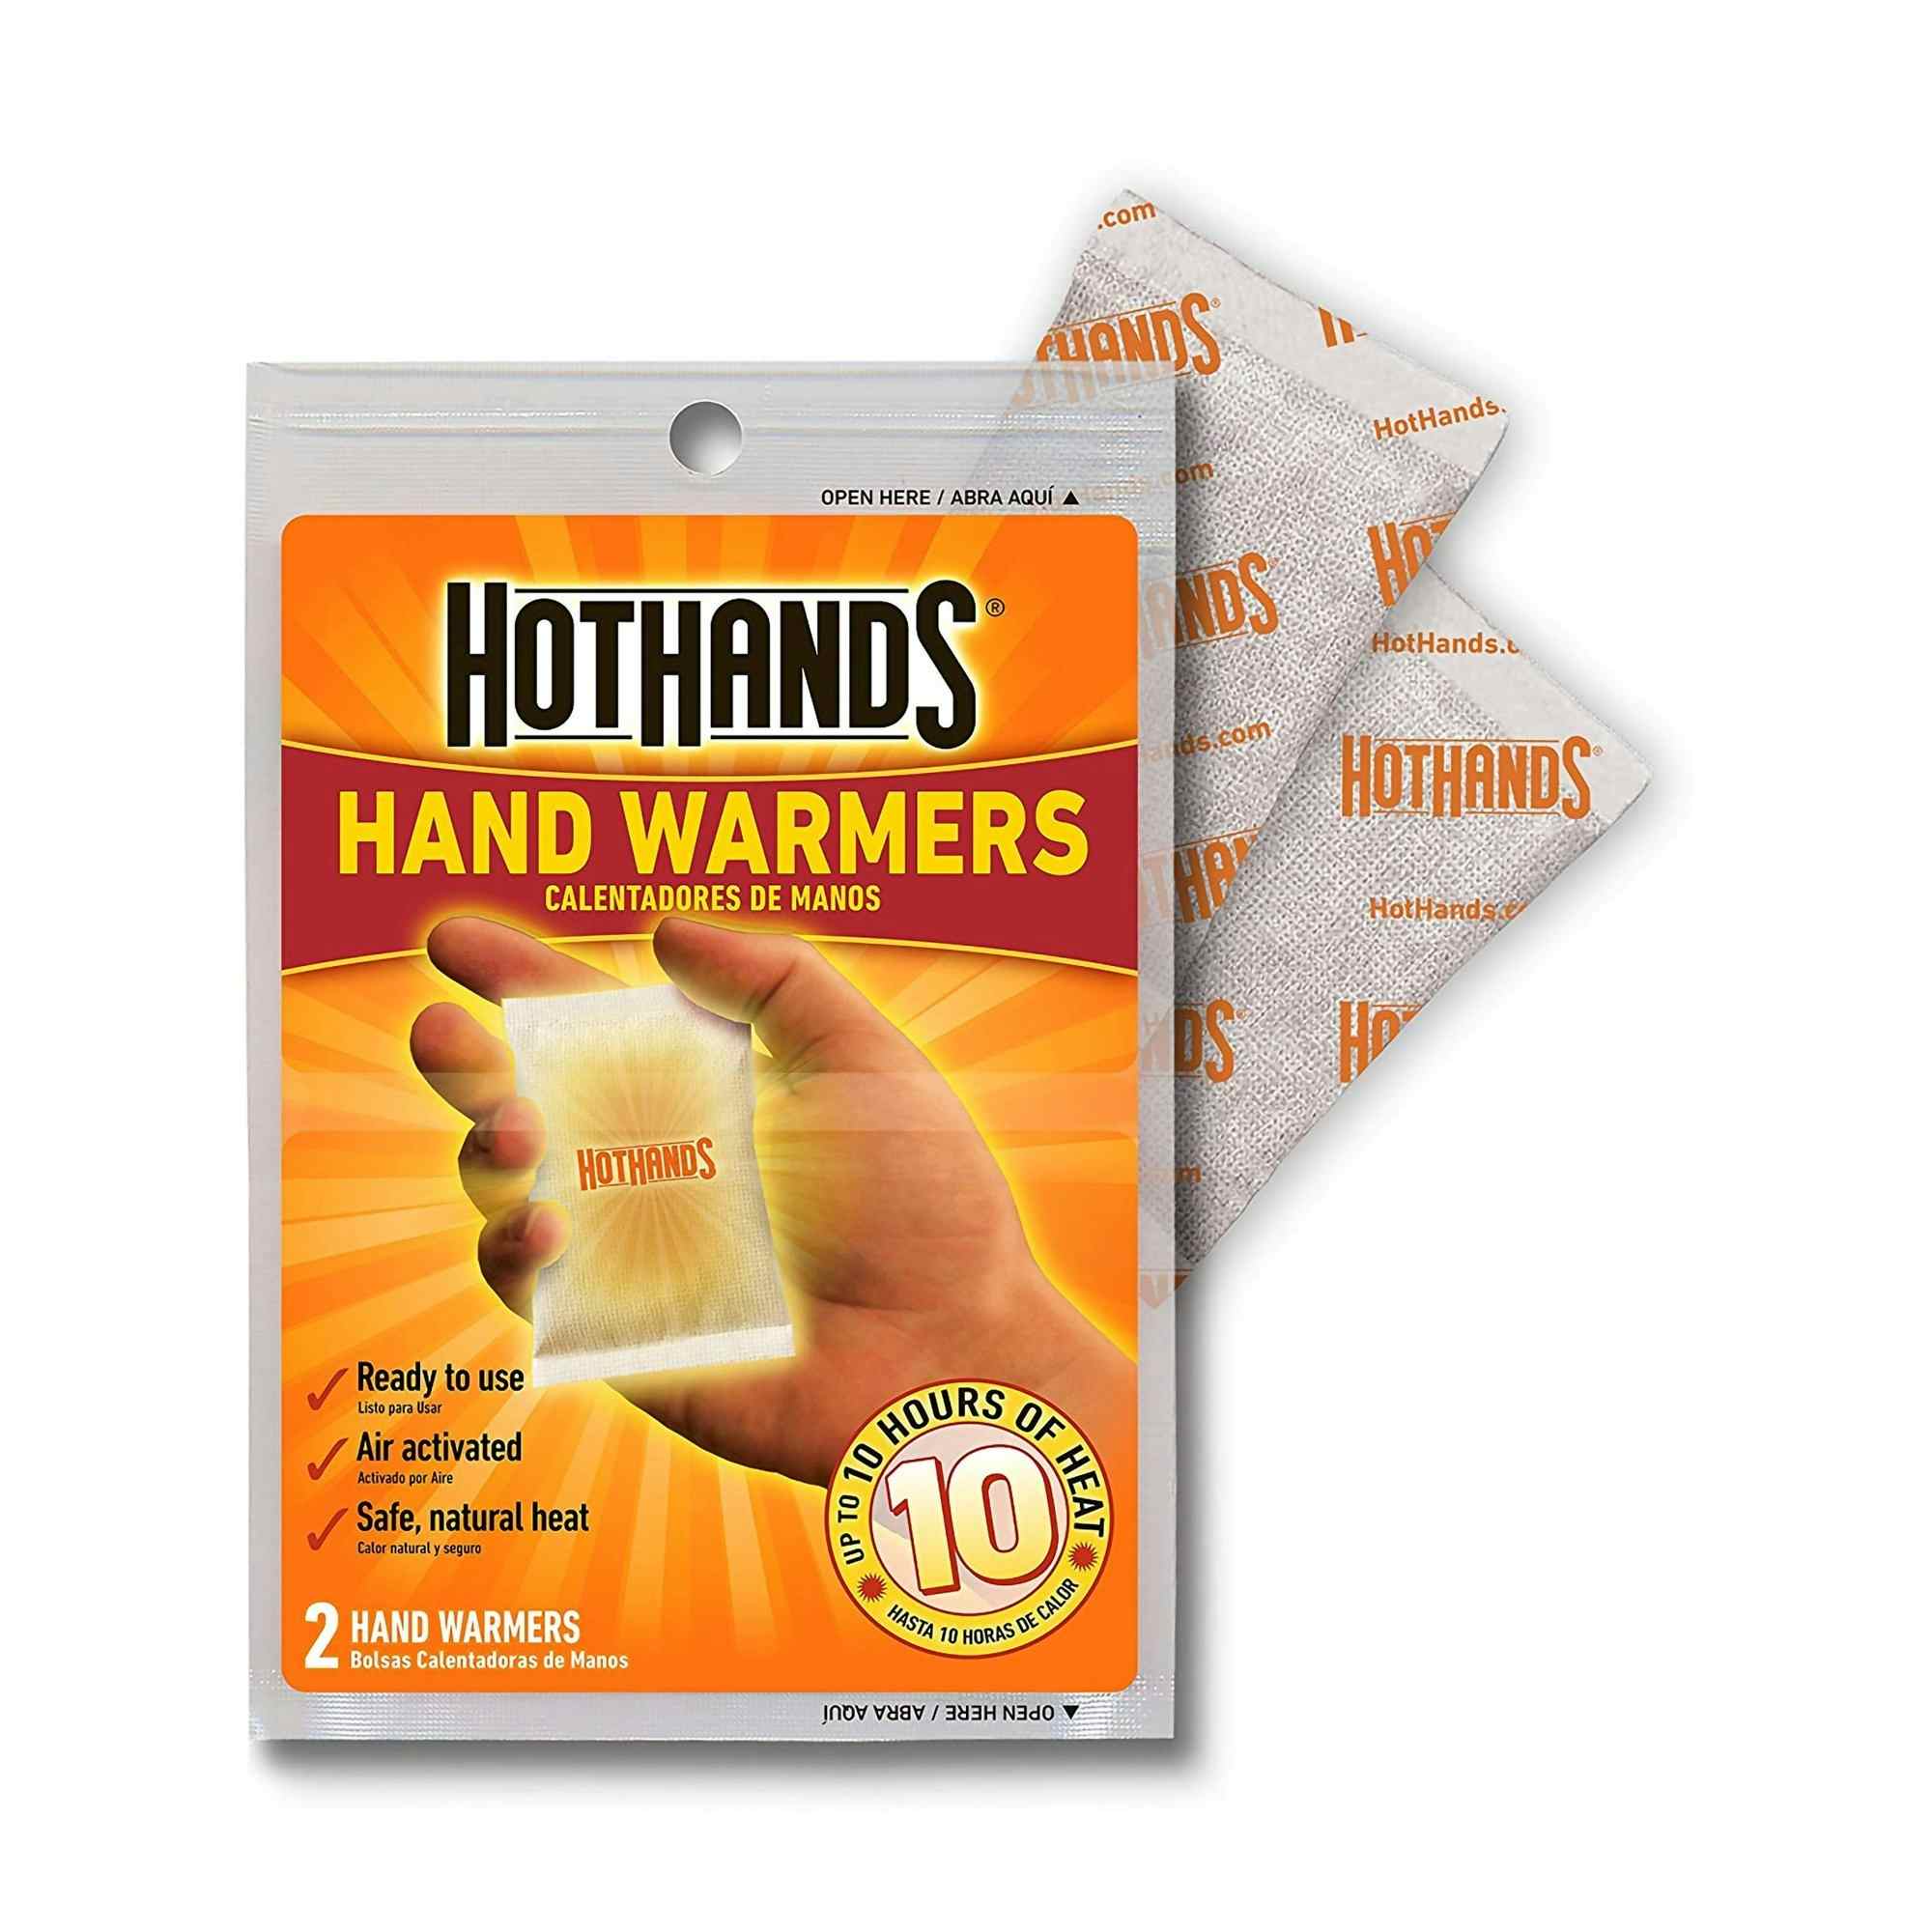 Hothands Instant Hand Warmers, HH-2, Box of 40